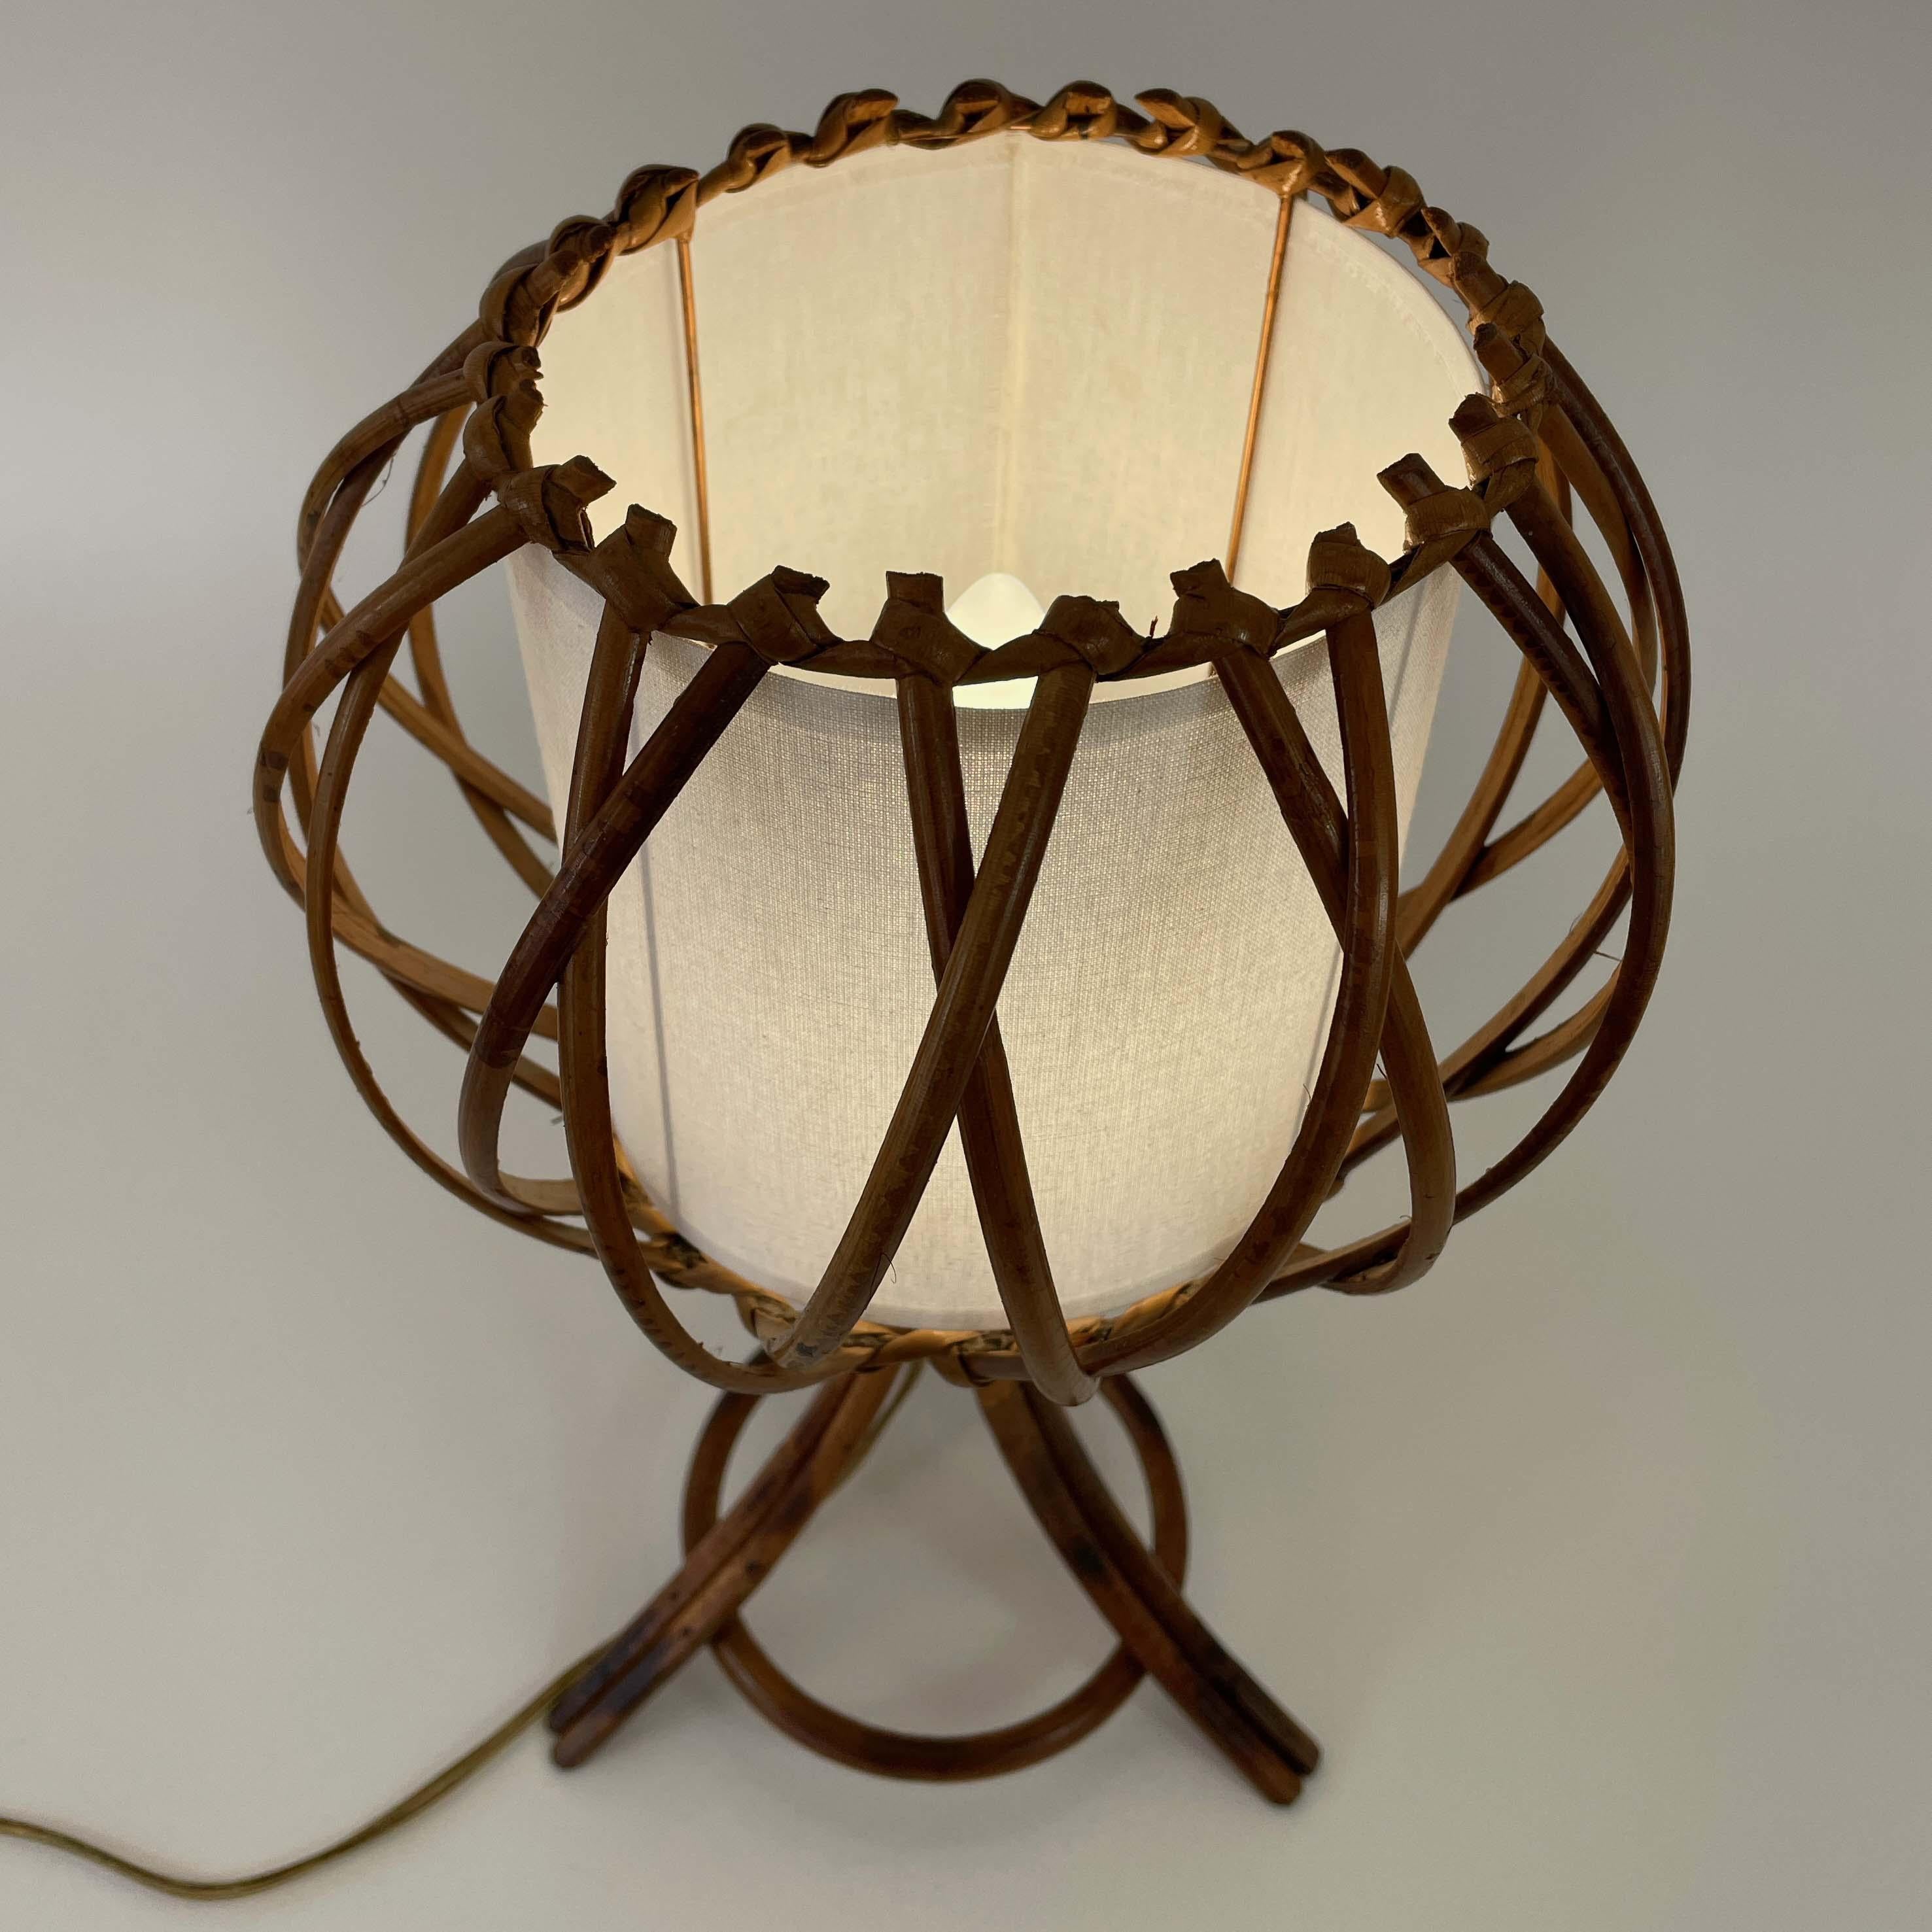 Rattan Bamboo & Fabric Table Lamp, Louis SOGNOT France 1950s For Sale 2